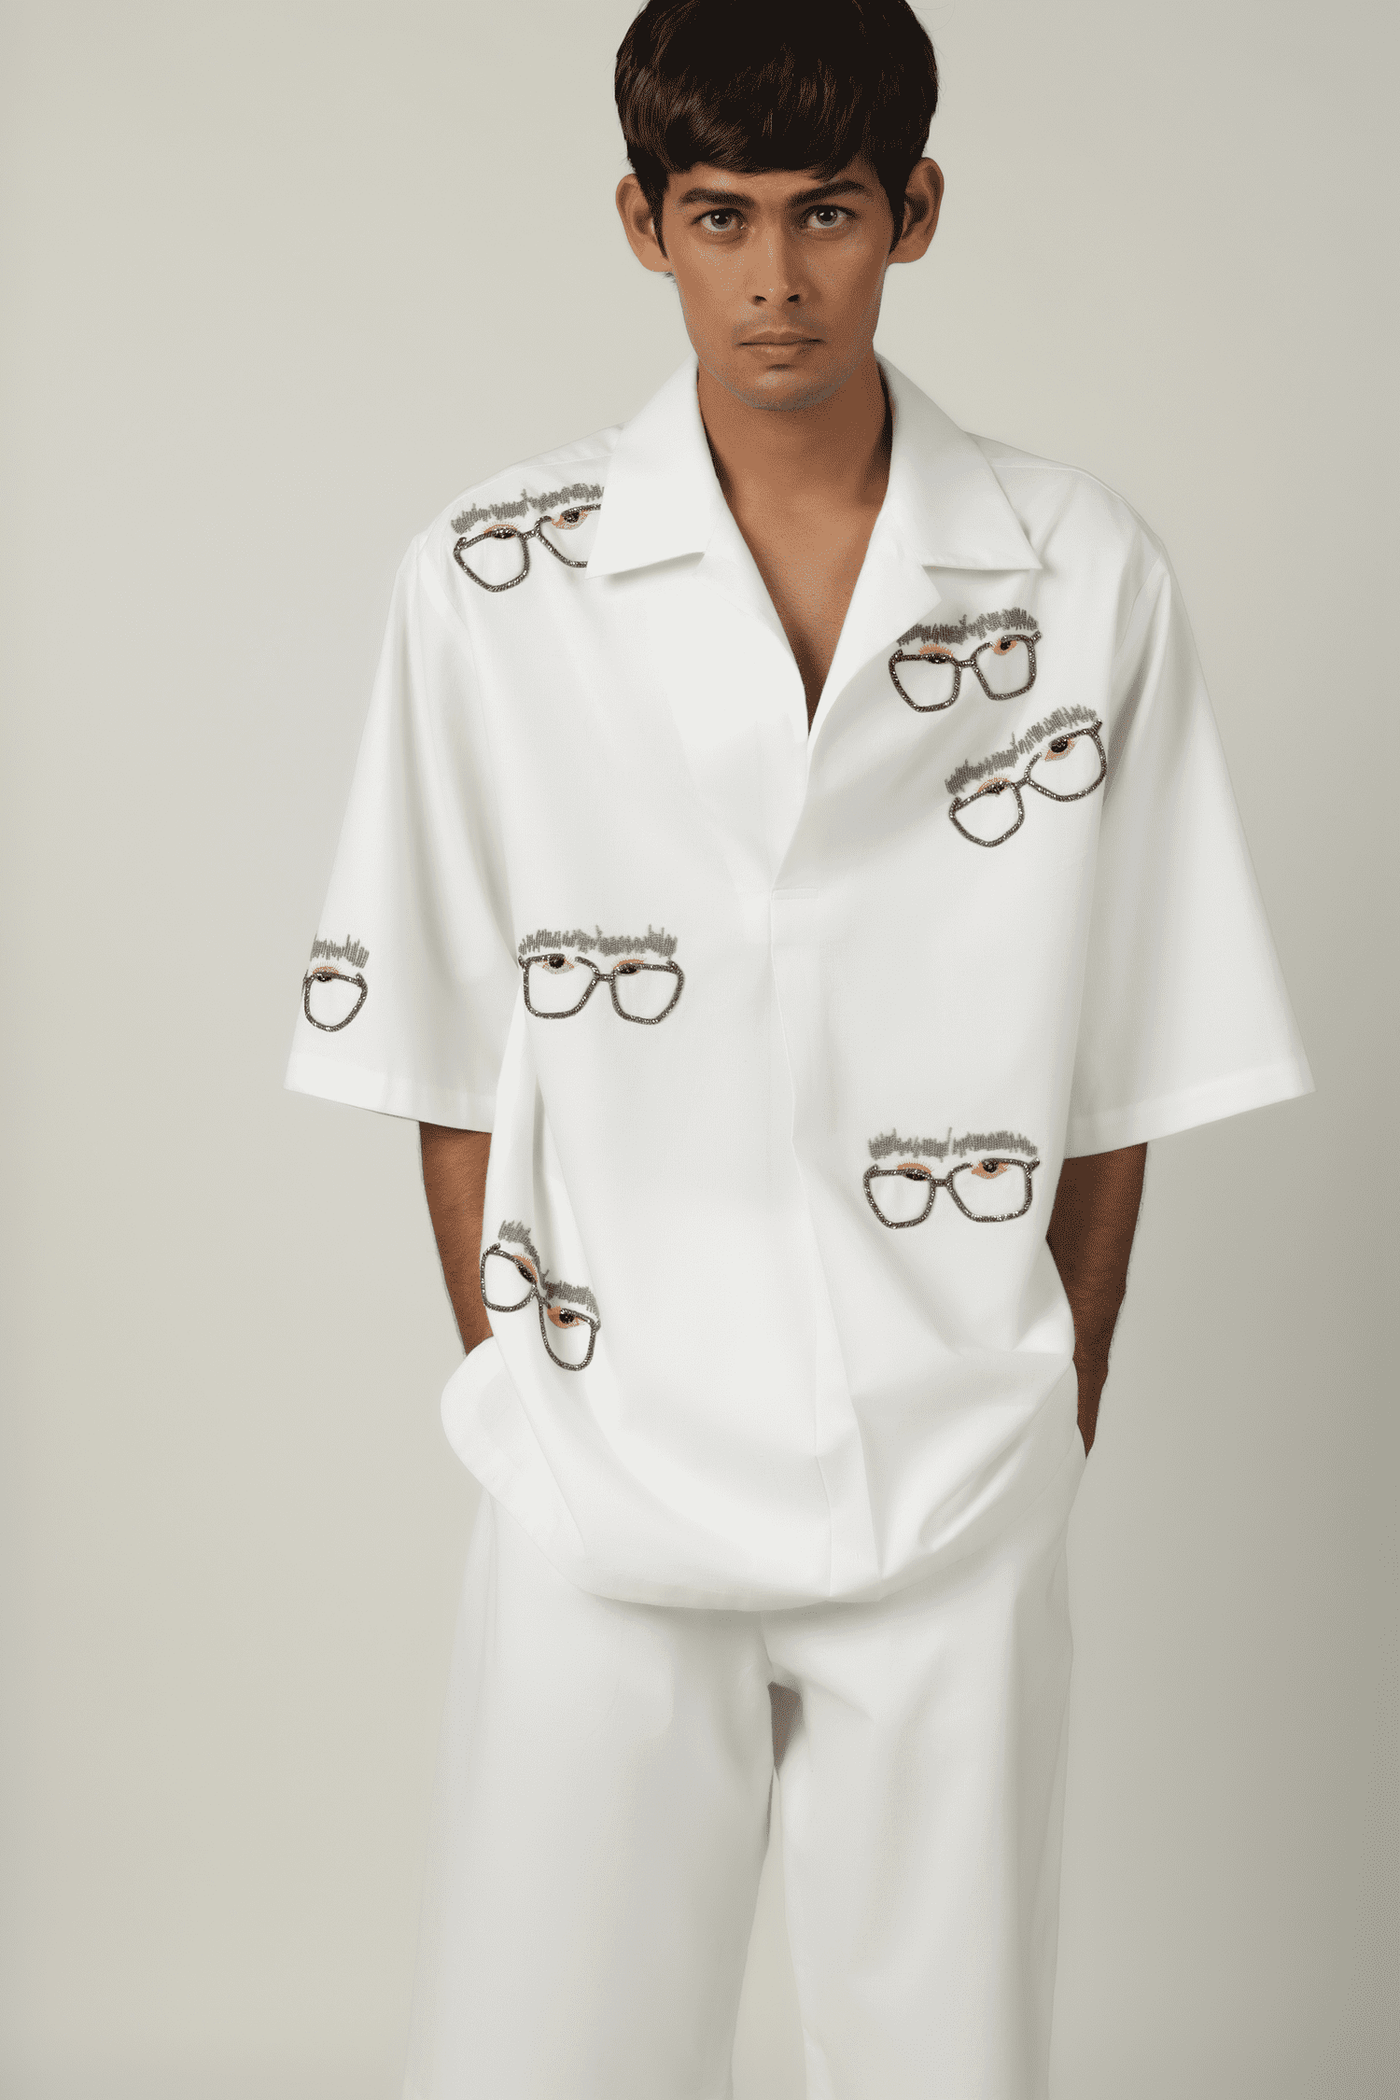 Specky Eye Overshirt With Shorts